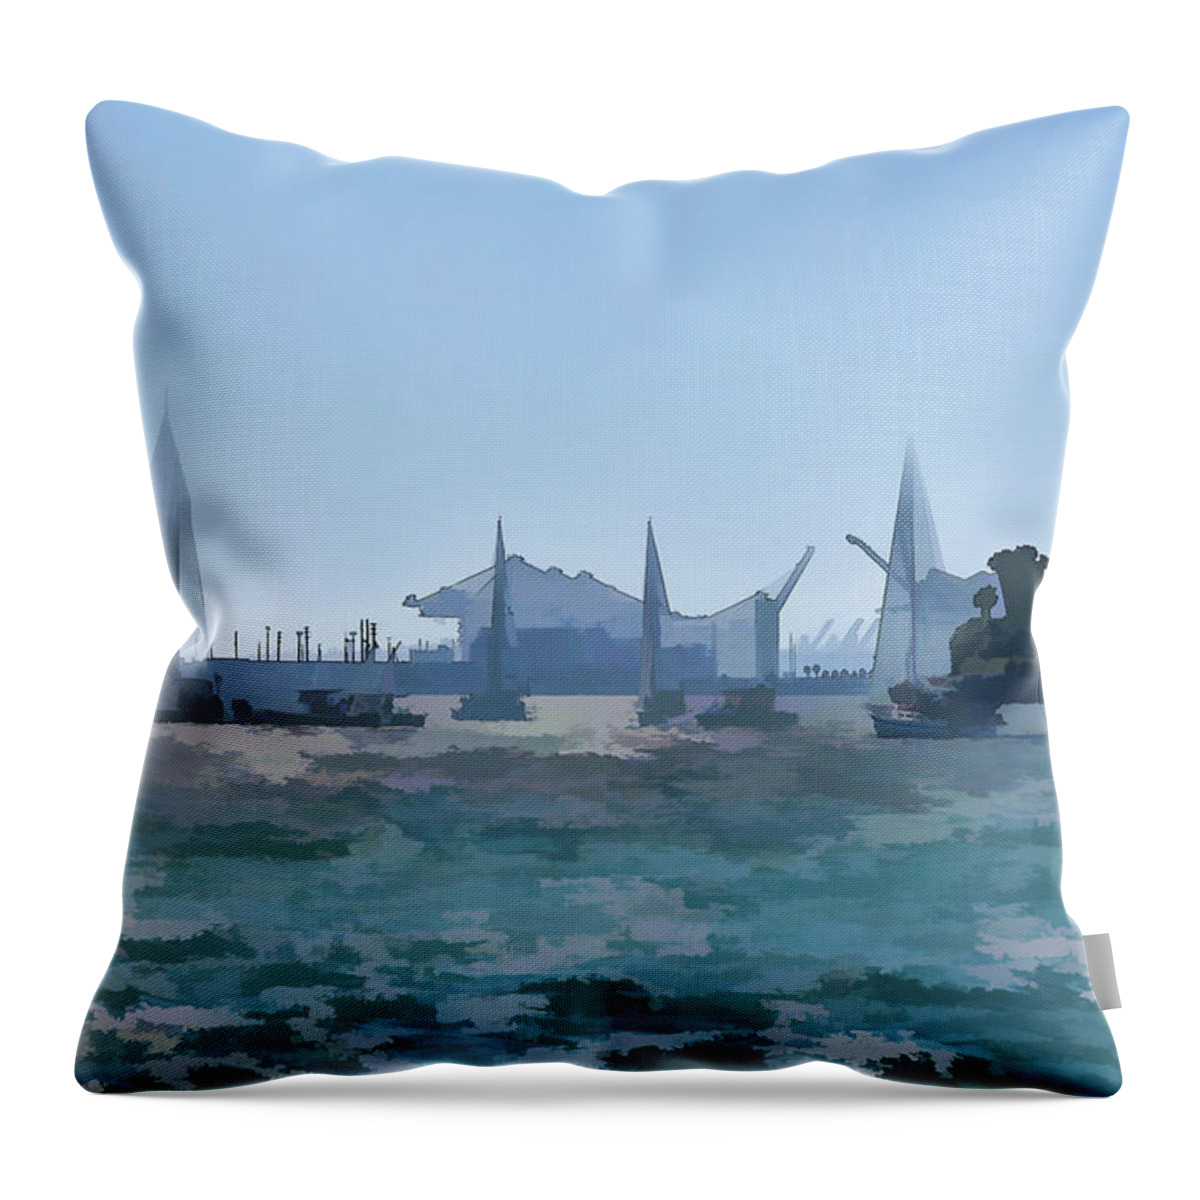 Linda Brody Throw Pillow featuring the digital art Sailing Off Belmont Shore Long Beach Abstract 1 by Linda Brody